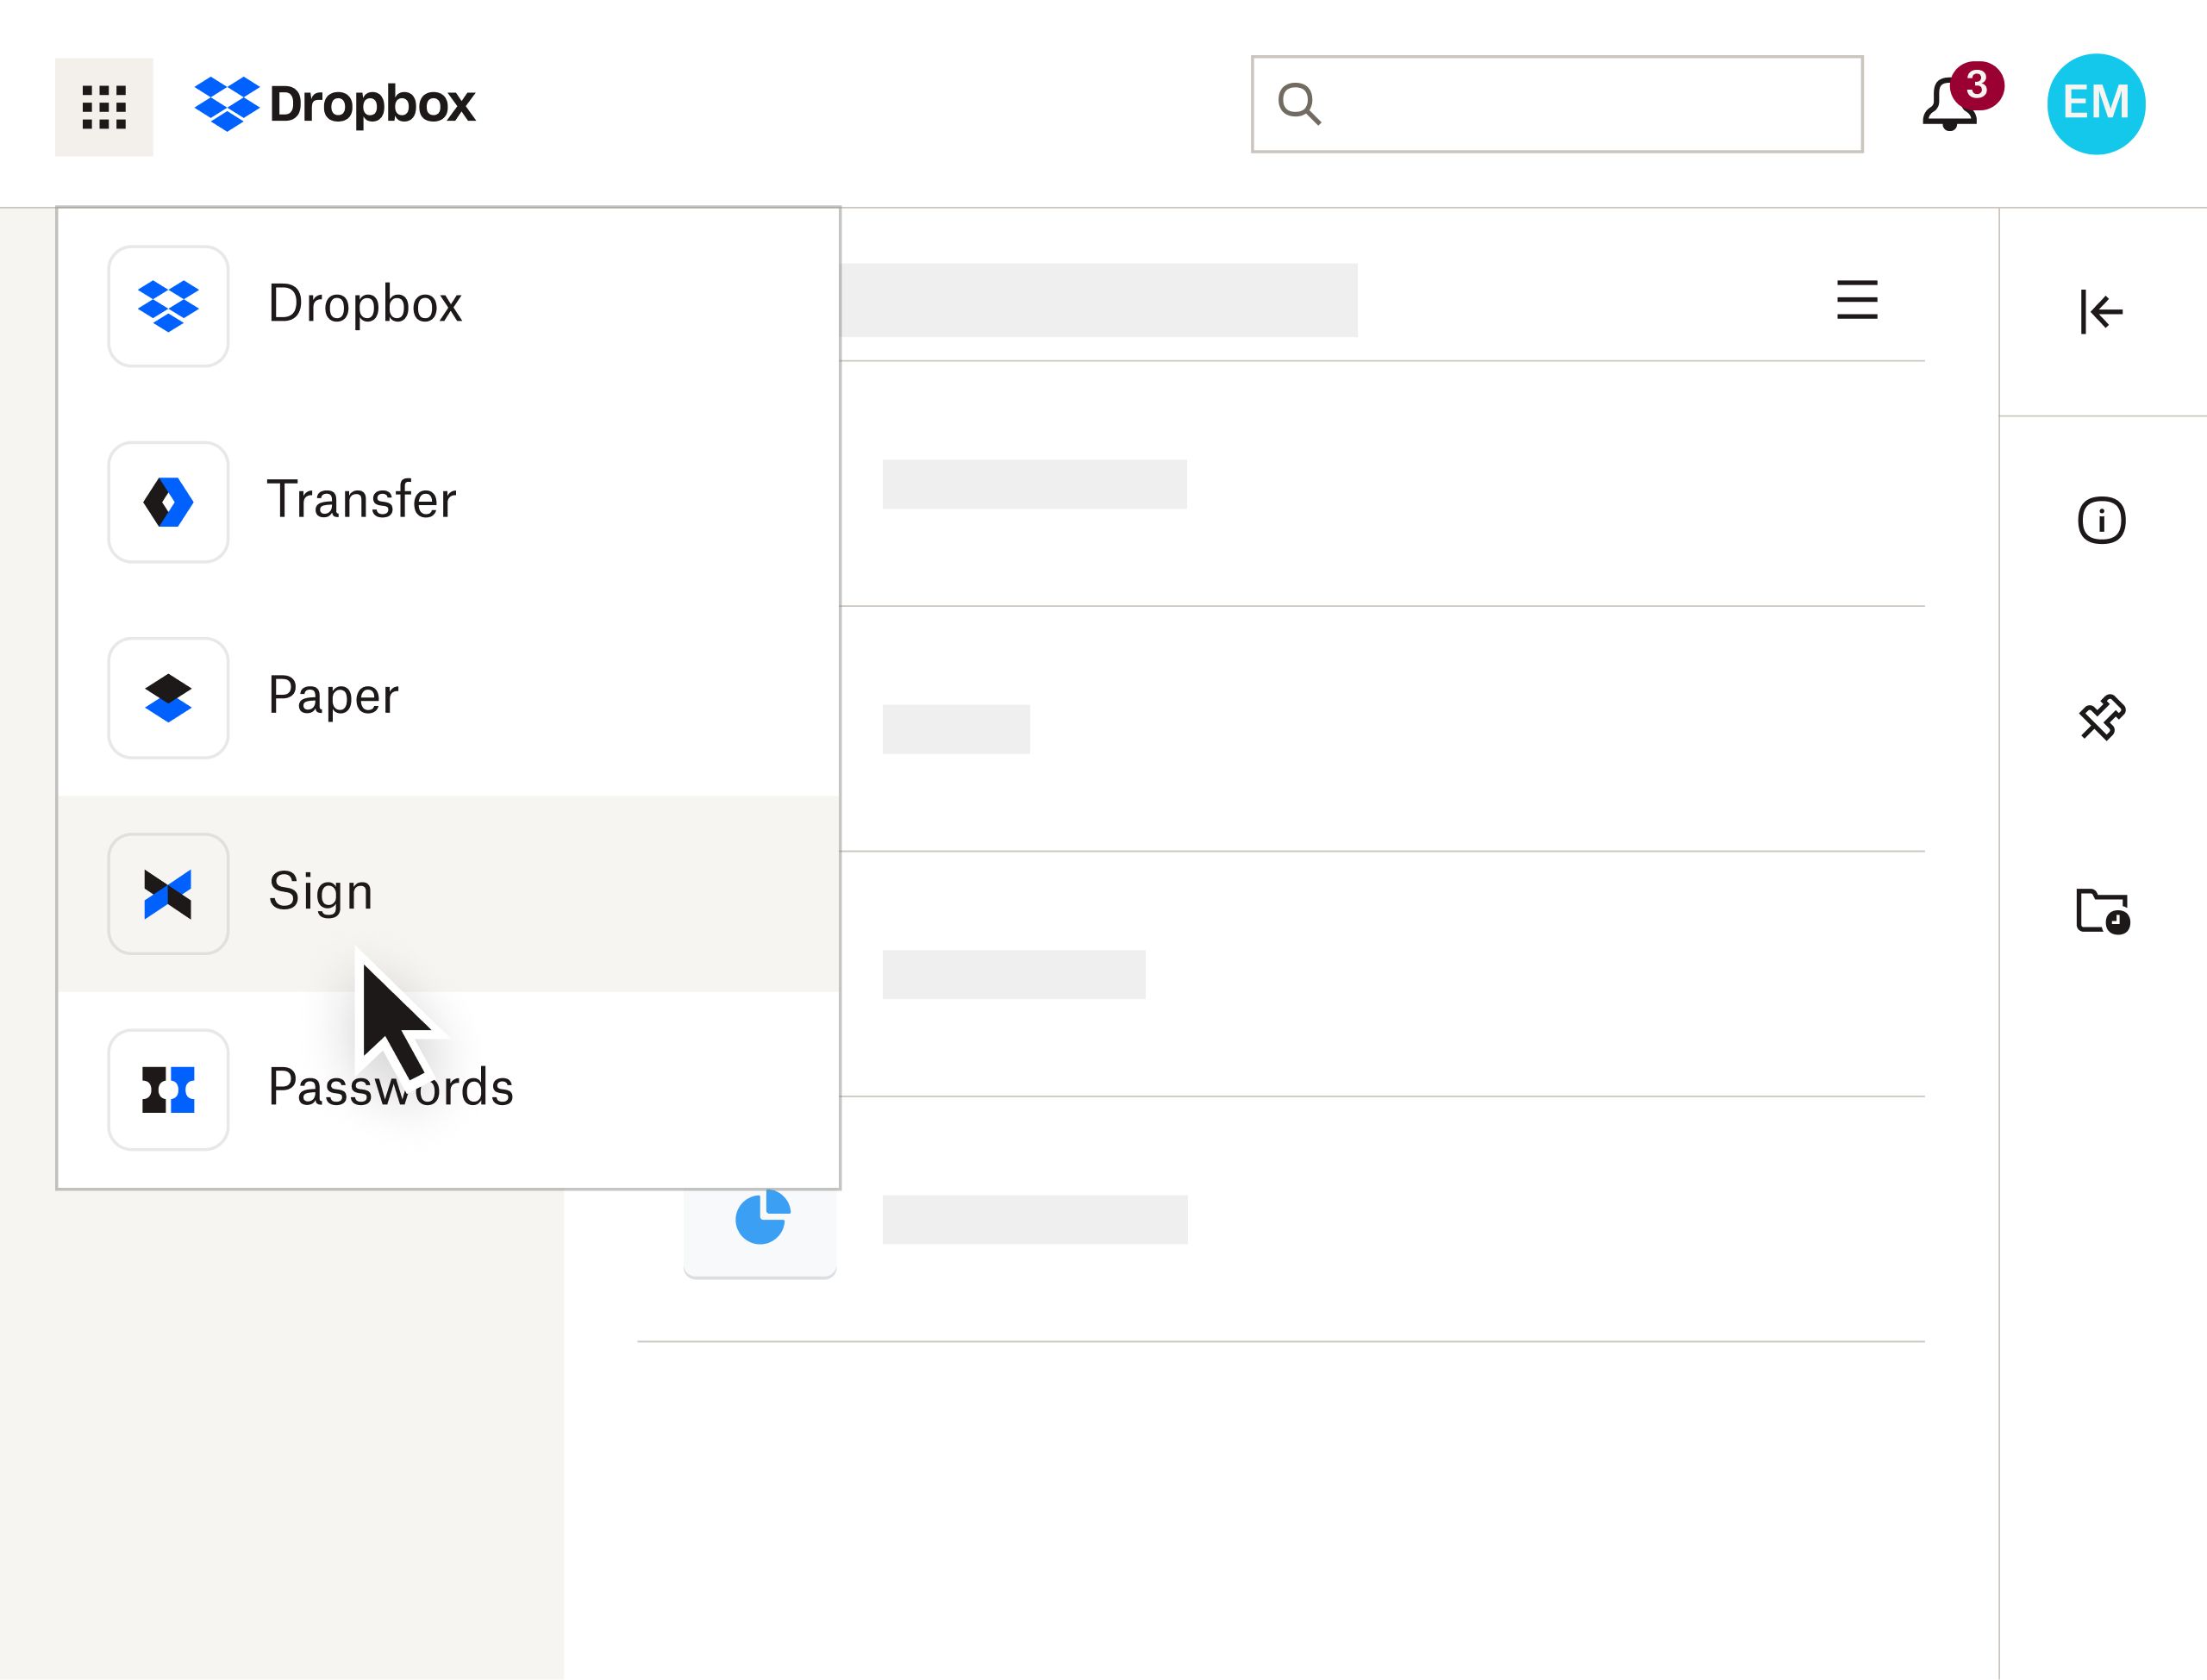 The Dropbox interface with a user selecting Sign from a product dropdown menu